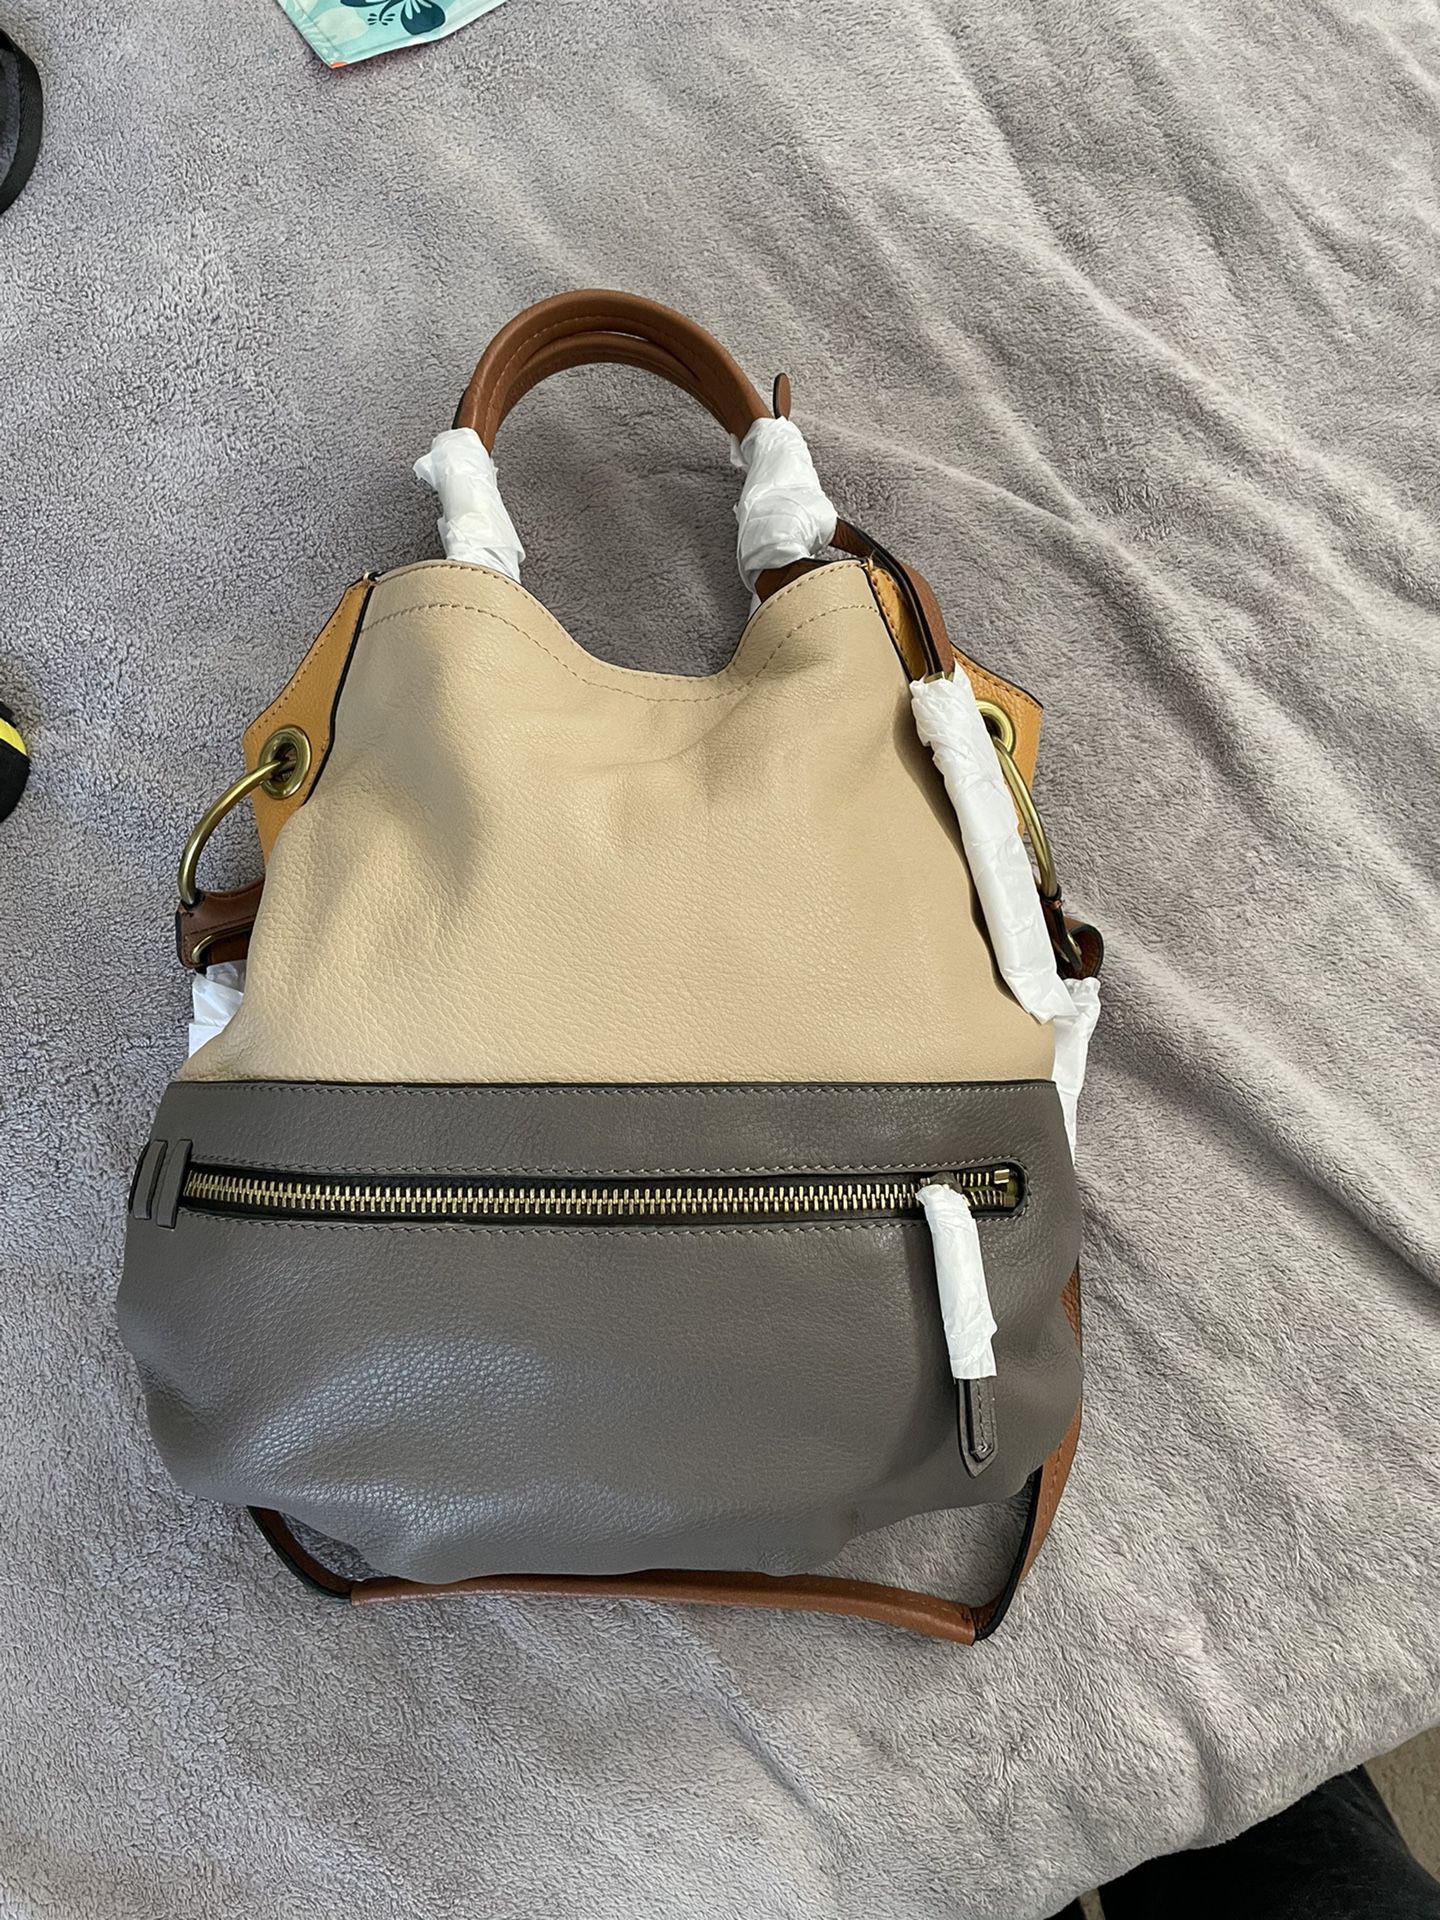 Almost New! Hard to Find! ORYANY Sydney Hobo Pebble Leather Color Block Bag w/ dust bag